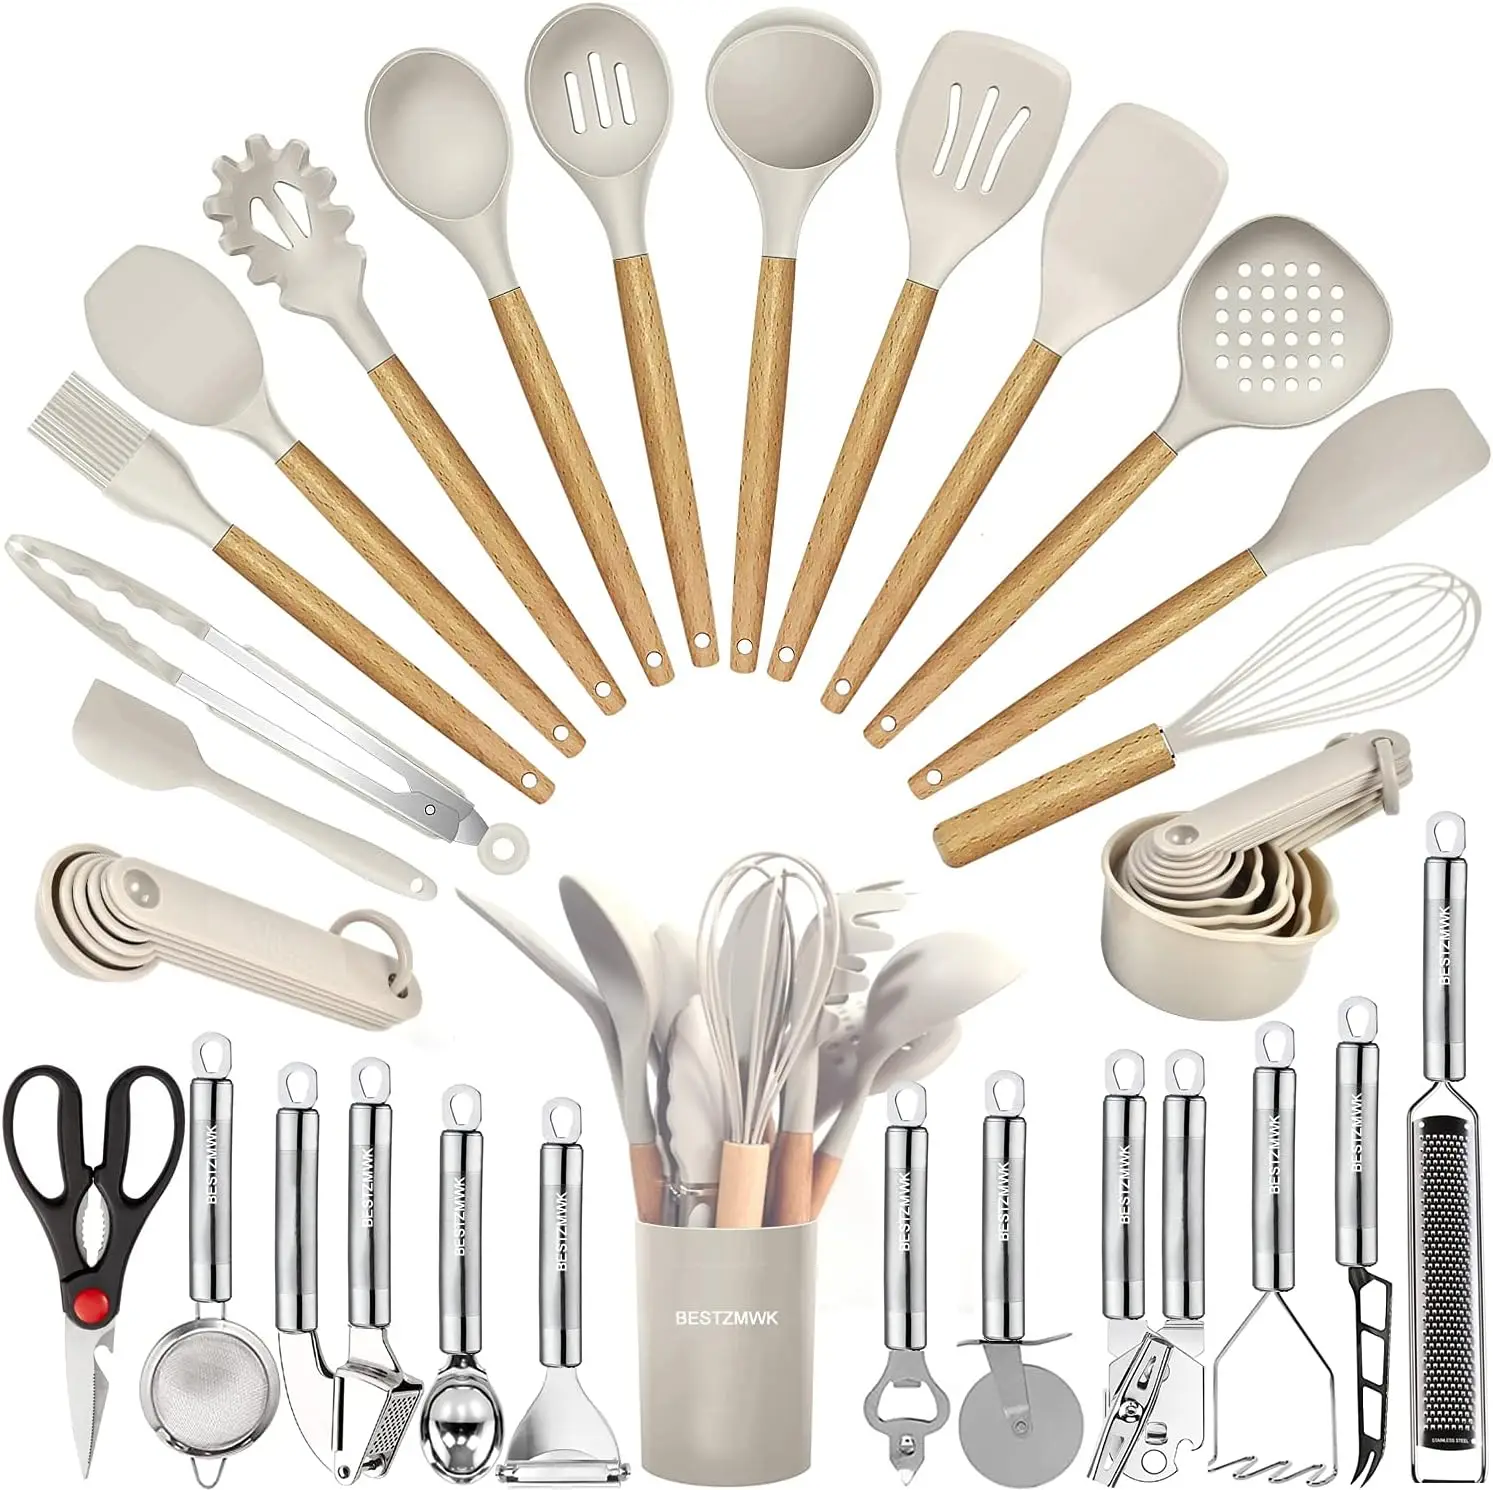 https://ae01.alicdn.com/kf/S5dc0557d142b452b8b8a7313eccd03ac7/Kitchen-Utensils-Set-35-PCs-Cooking-Utensils-Made-of-Heat-Resistant-Food-Grade-Silicone-and-Wooden.jpg